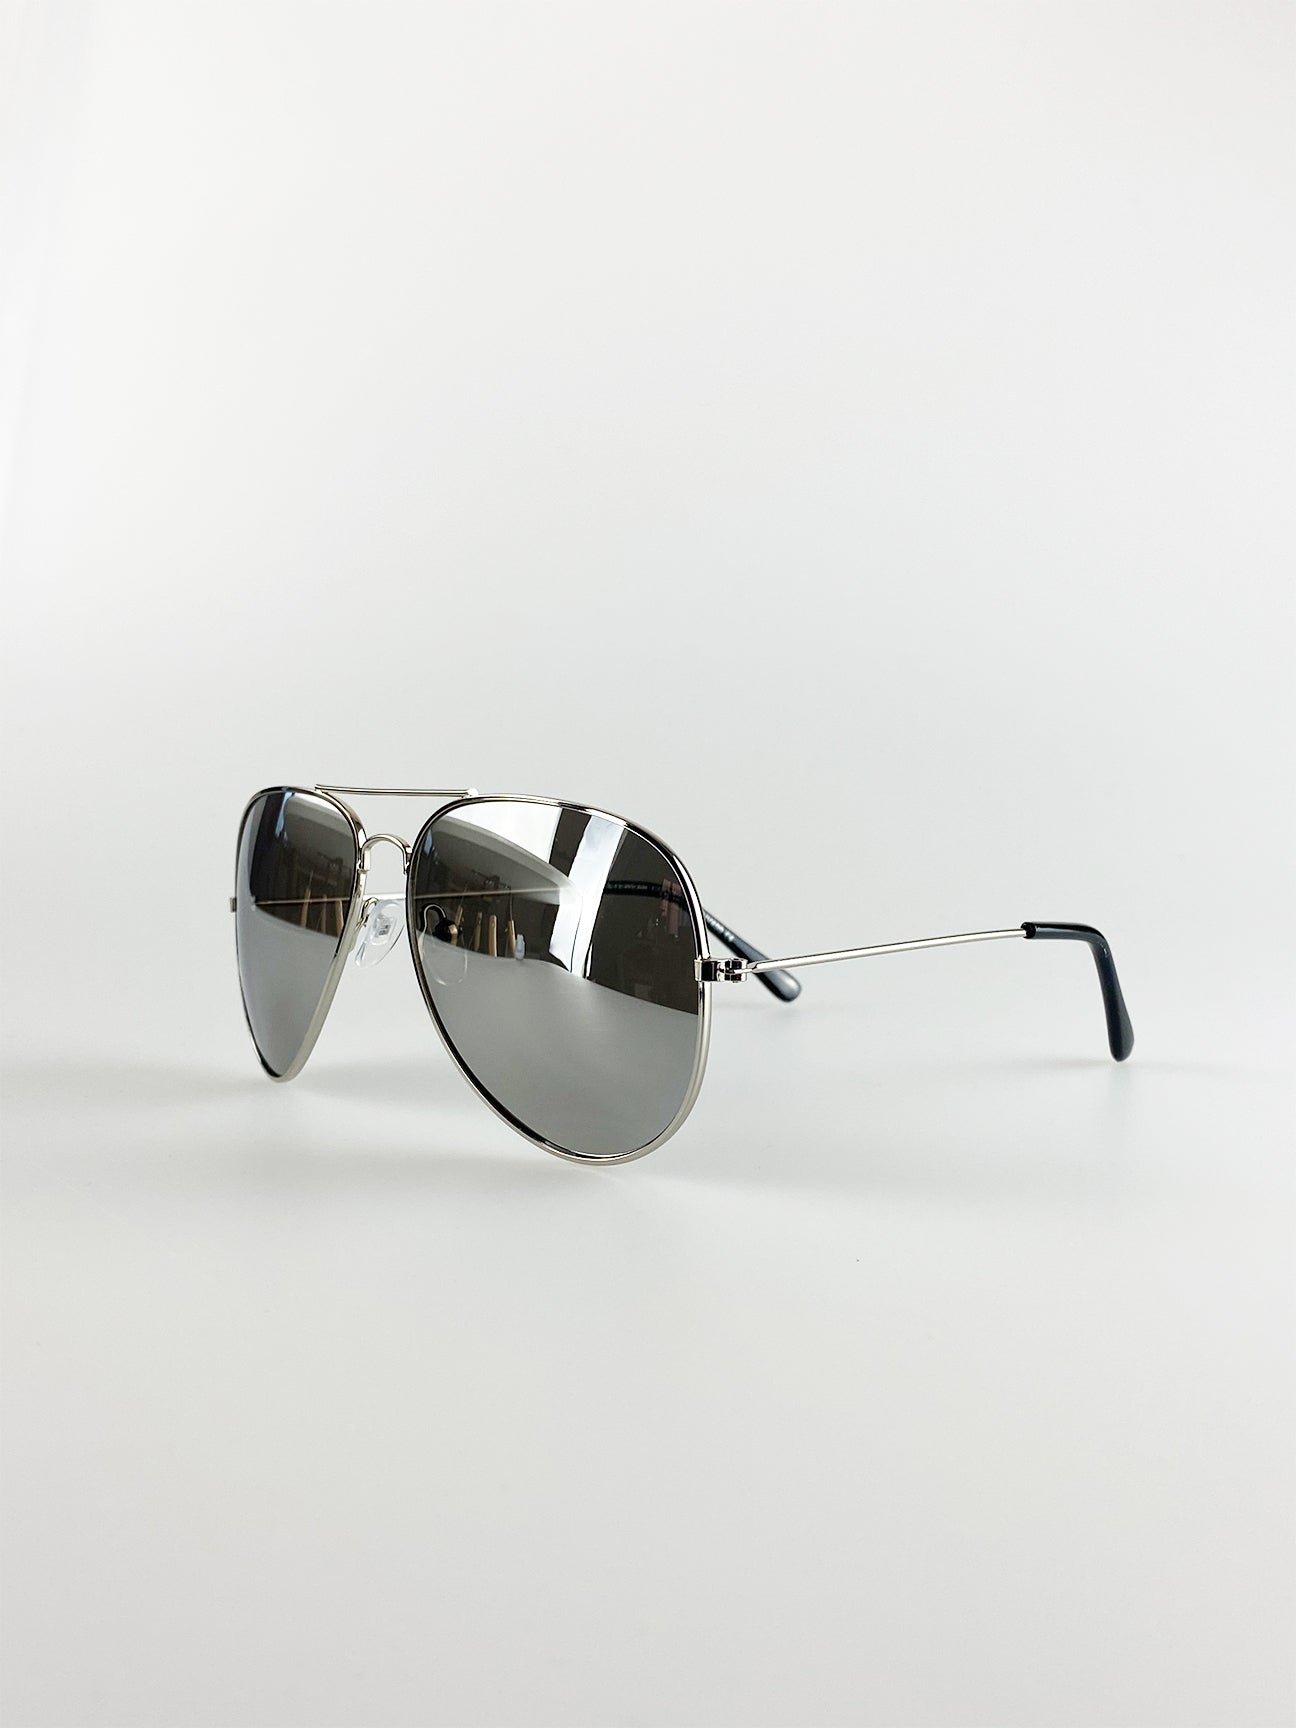 Silver Classic Pilot Aviator Sunglasses with Mirrored Lens